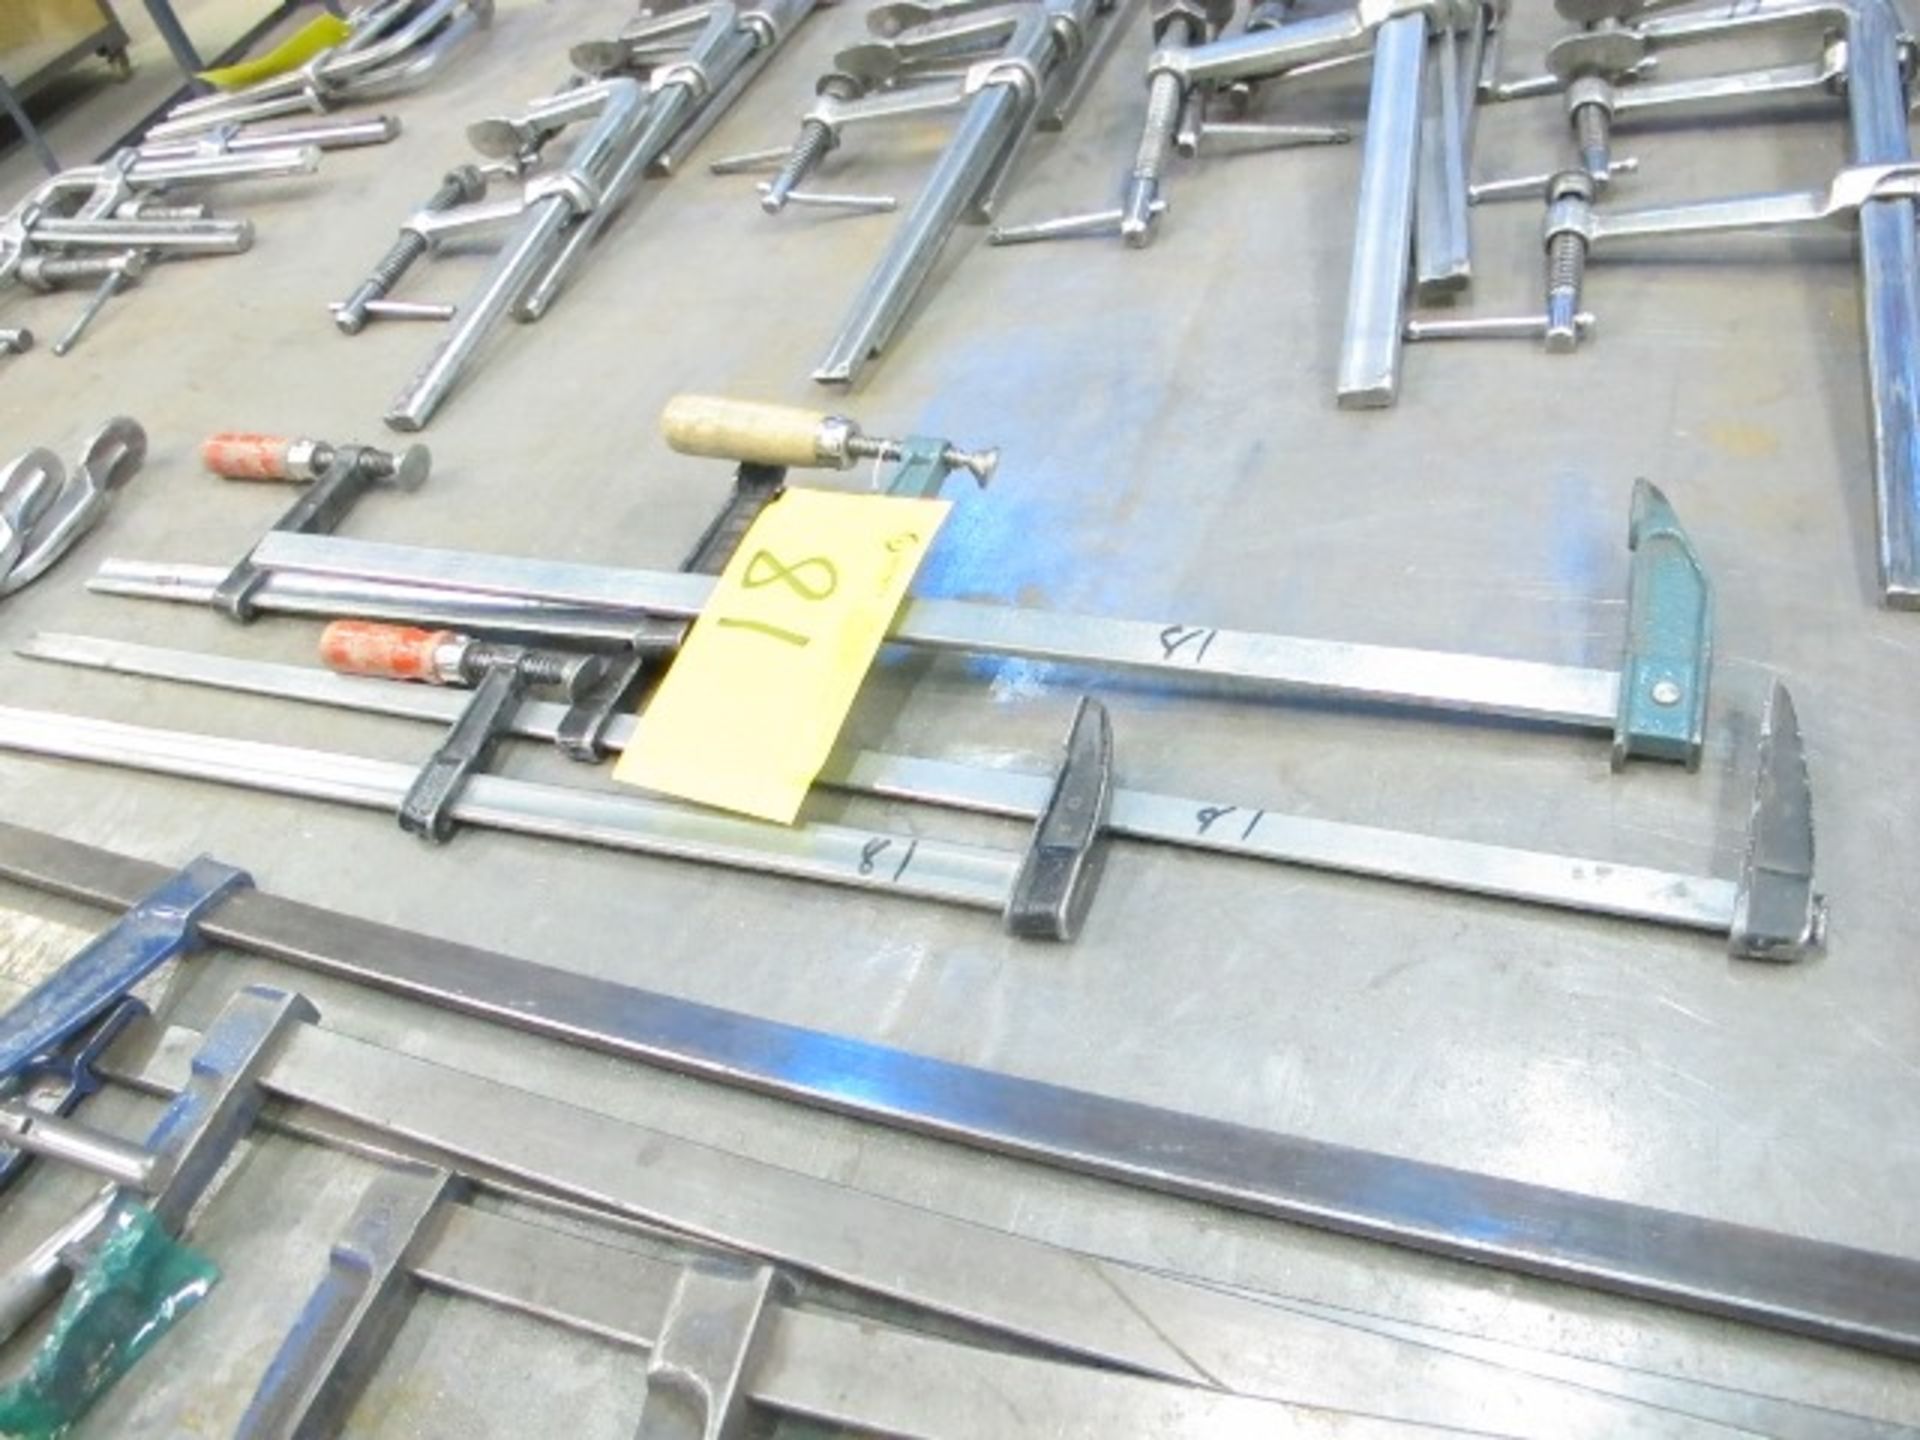 BAR CLAMPS